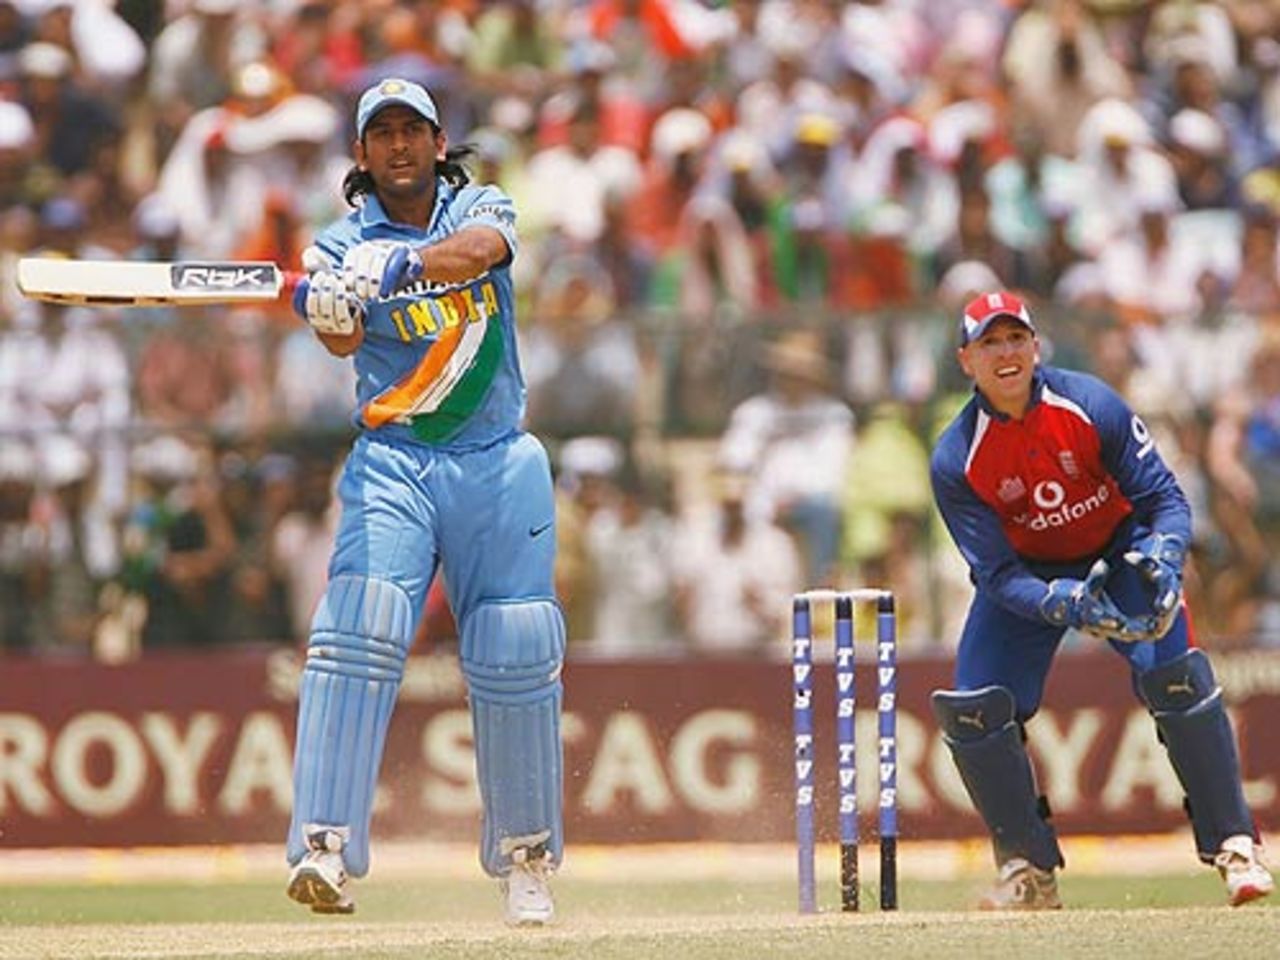 Mahendra Singh Dhoni smashes one to the midwicket fence, India v England, 6th ODI, Jamshedpur, April 12, 2006